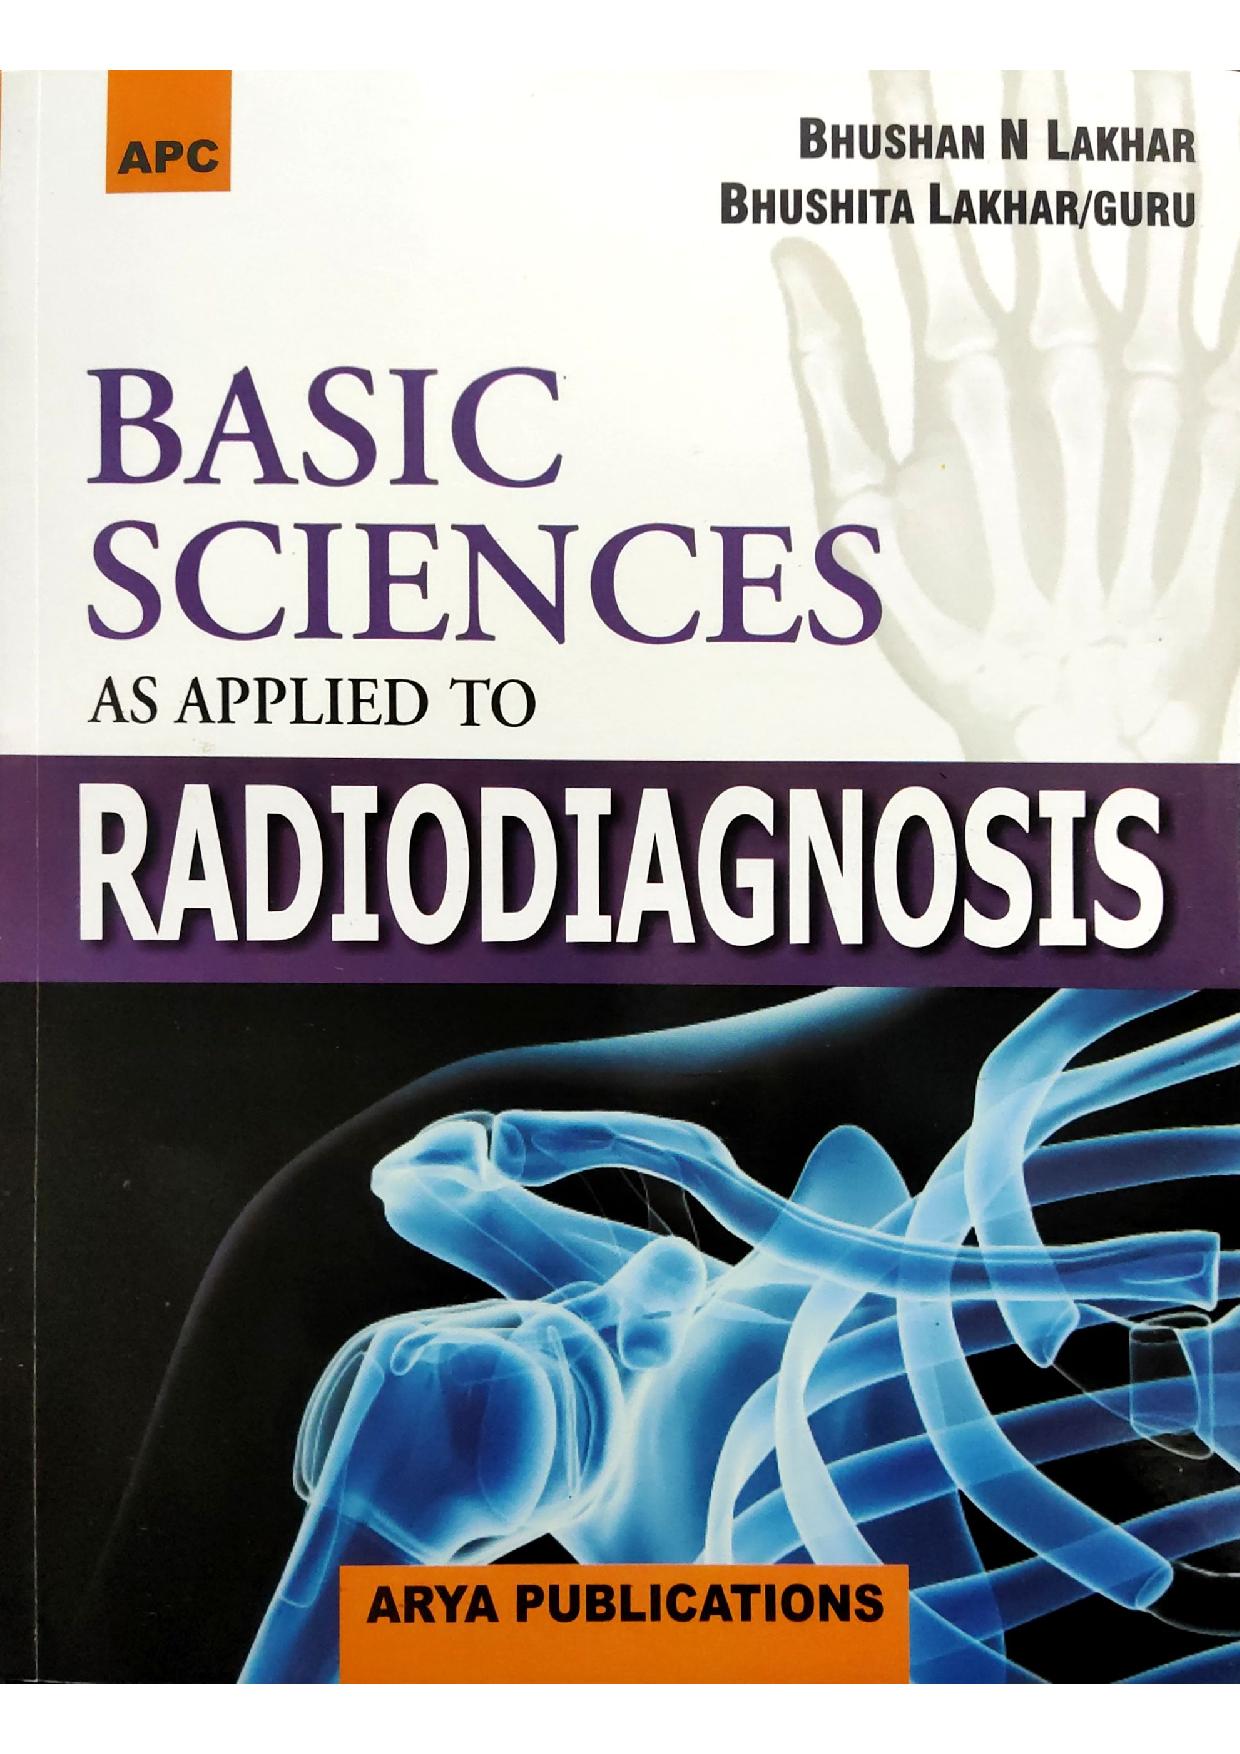 Basic Science as applied to Radiodiagnosis